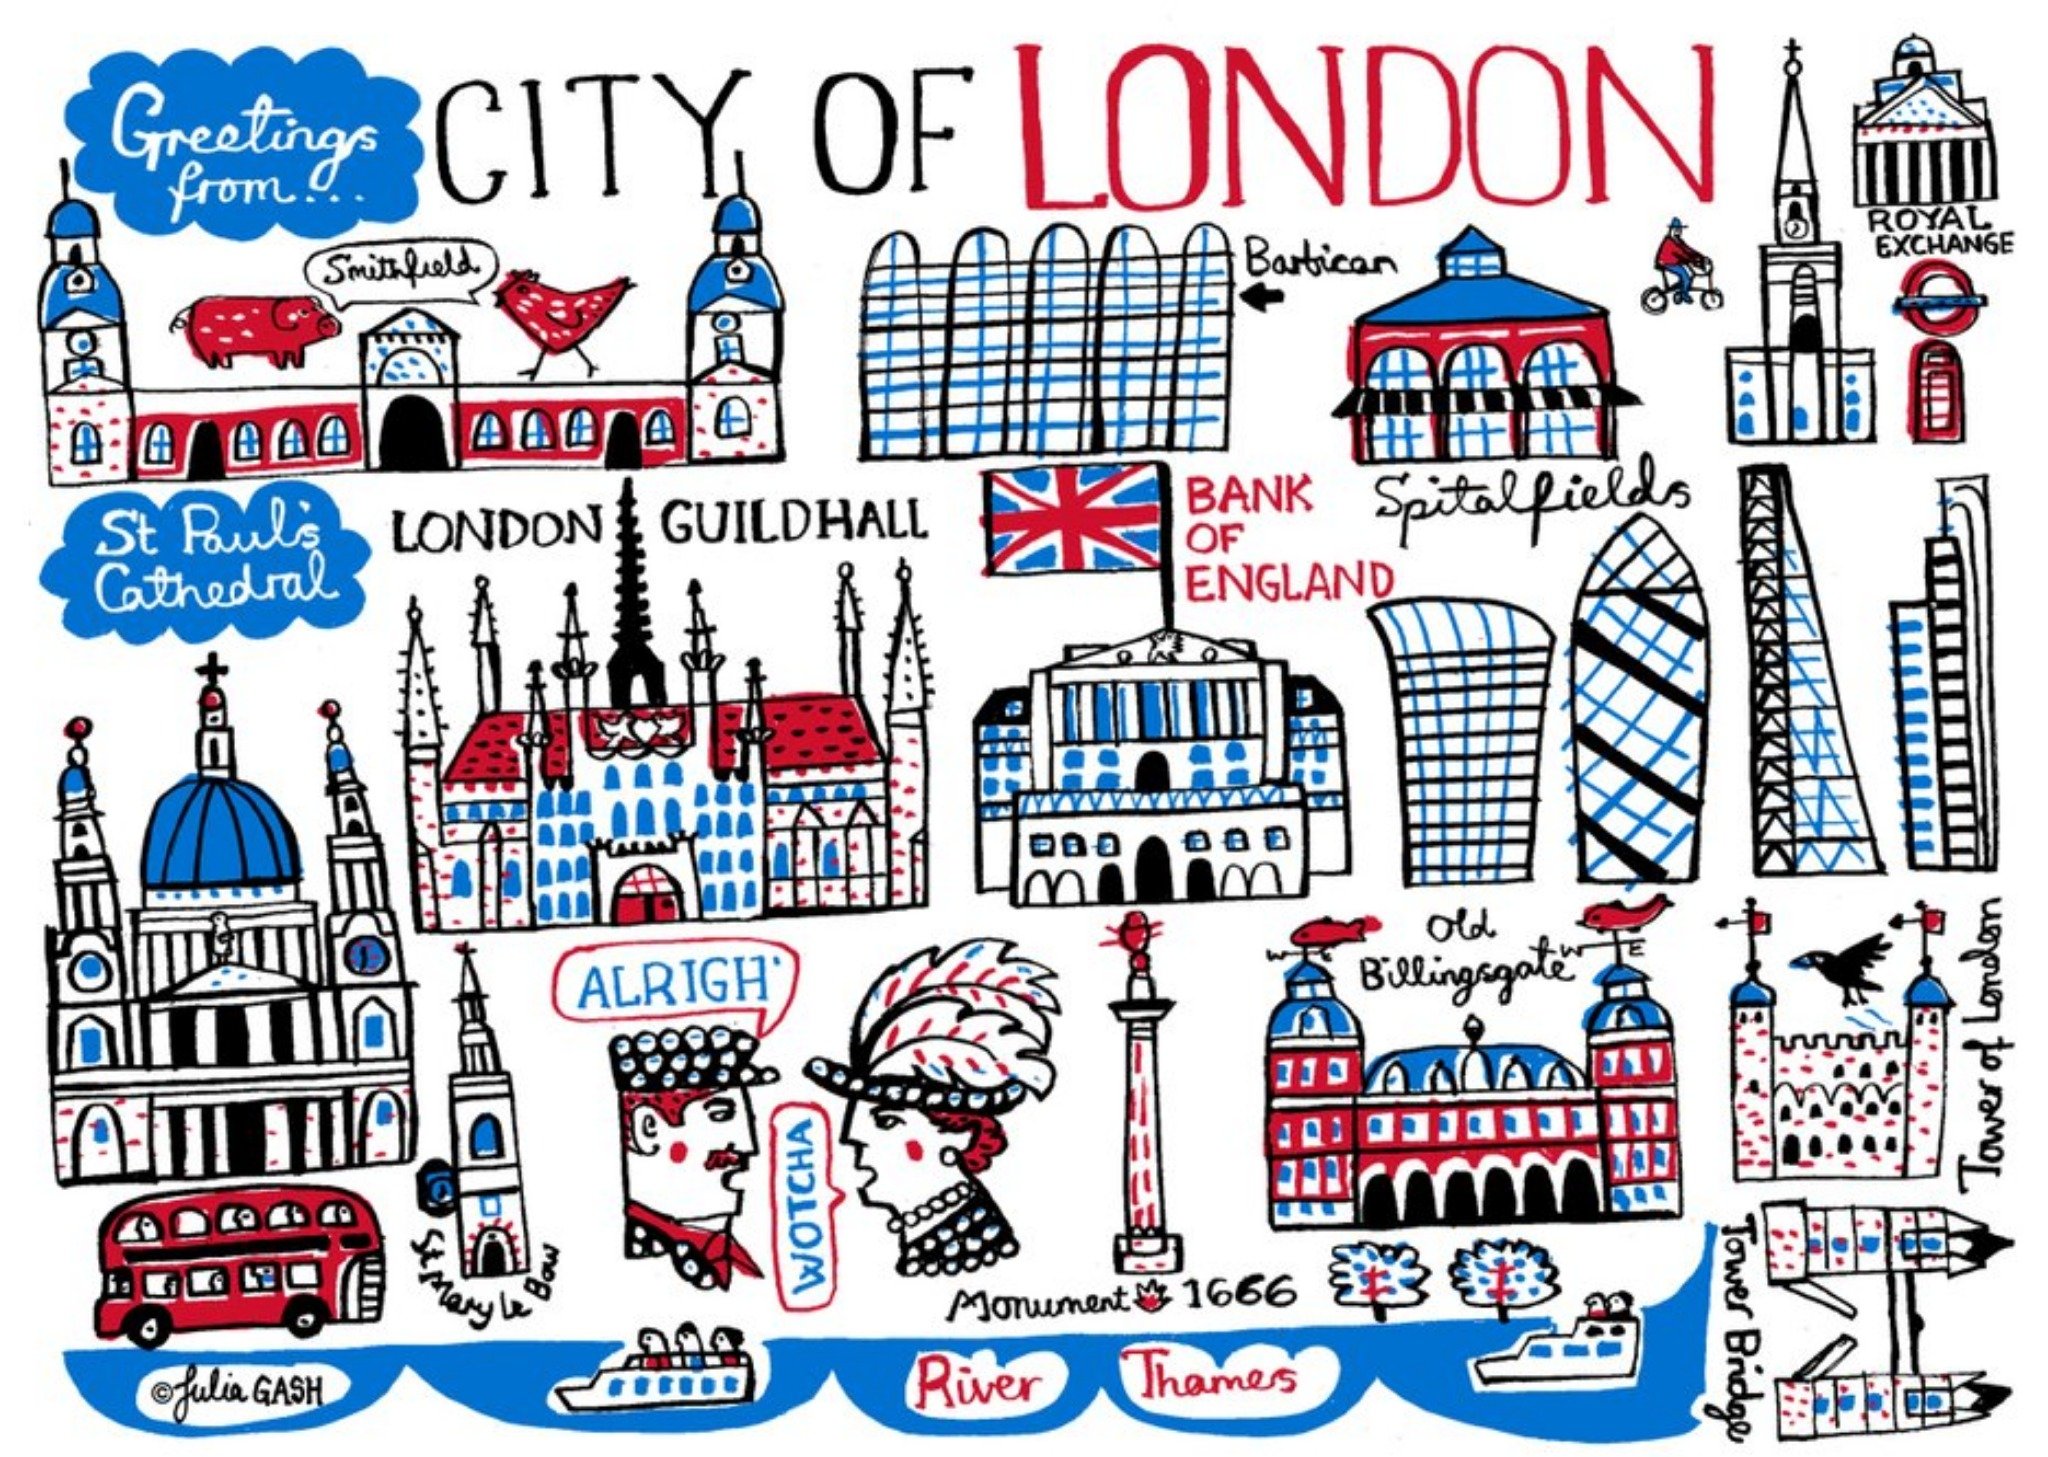 Moonpig Illustrated Greetings From London Map Card, Large